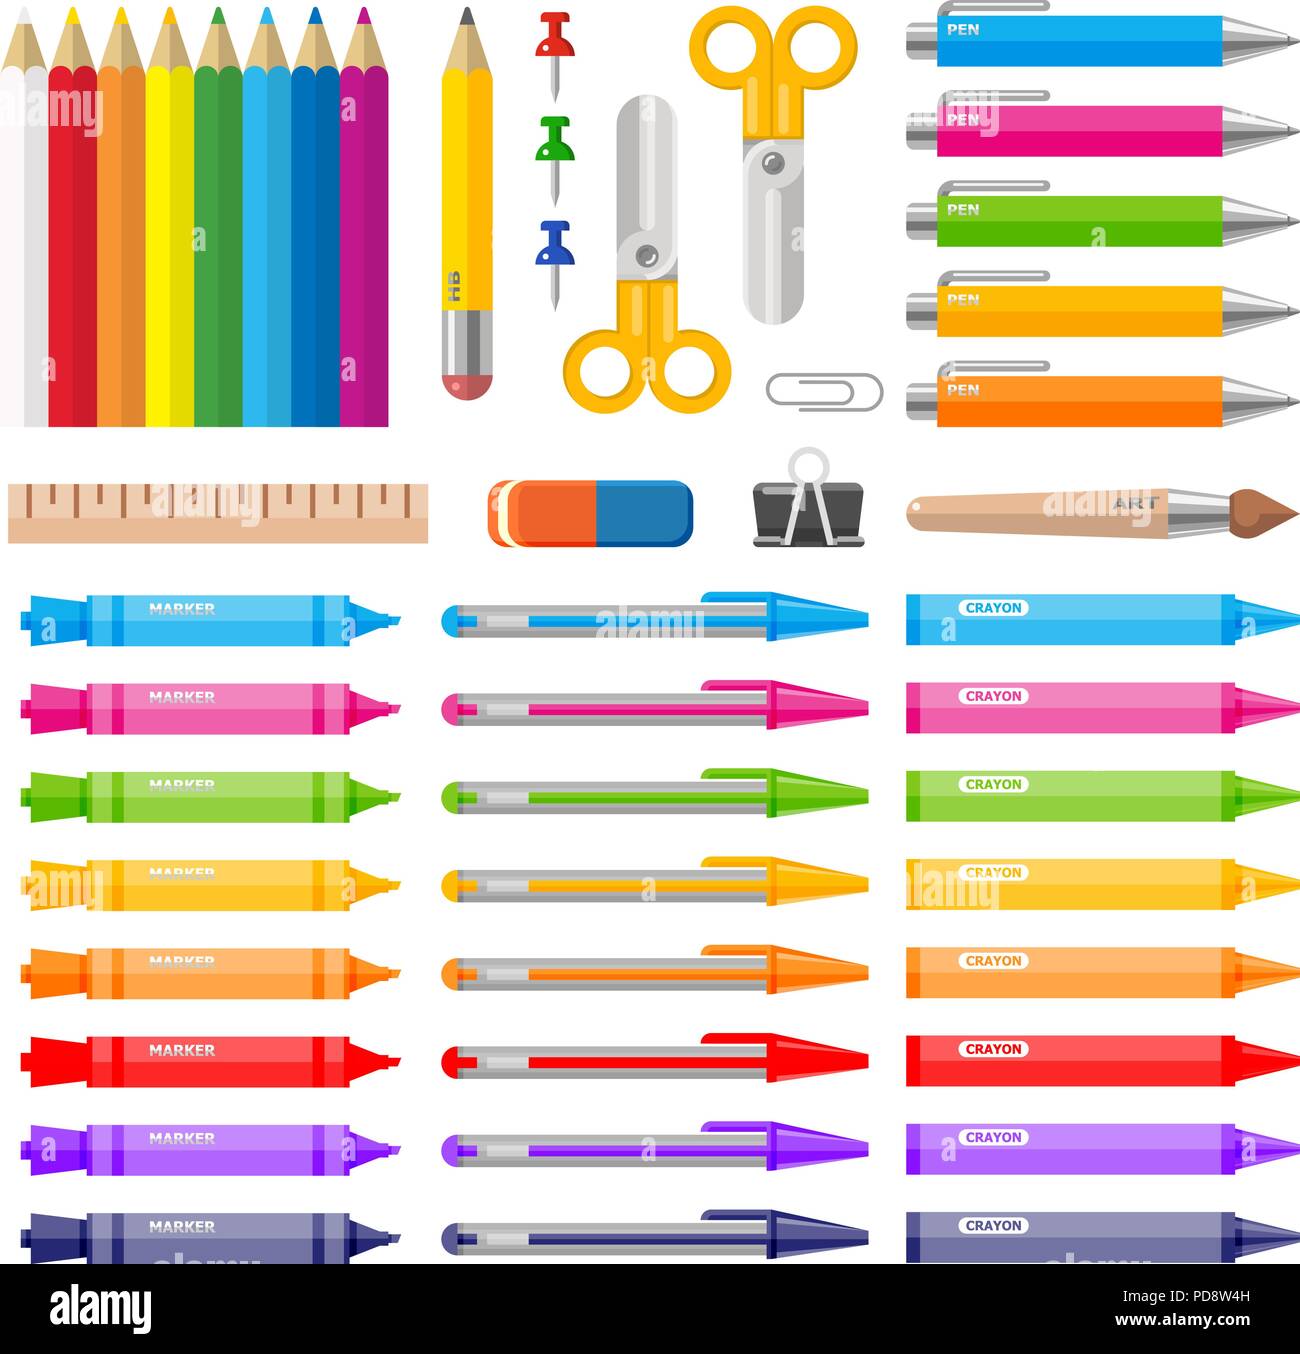 https://c8.alamy.com/comp/PD8W4H/variety-of-color-pens-pencils-markers-and-crayons-PD8W4H.jpg